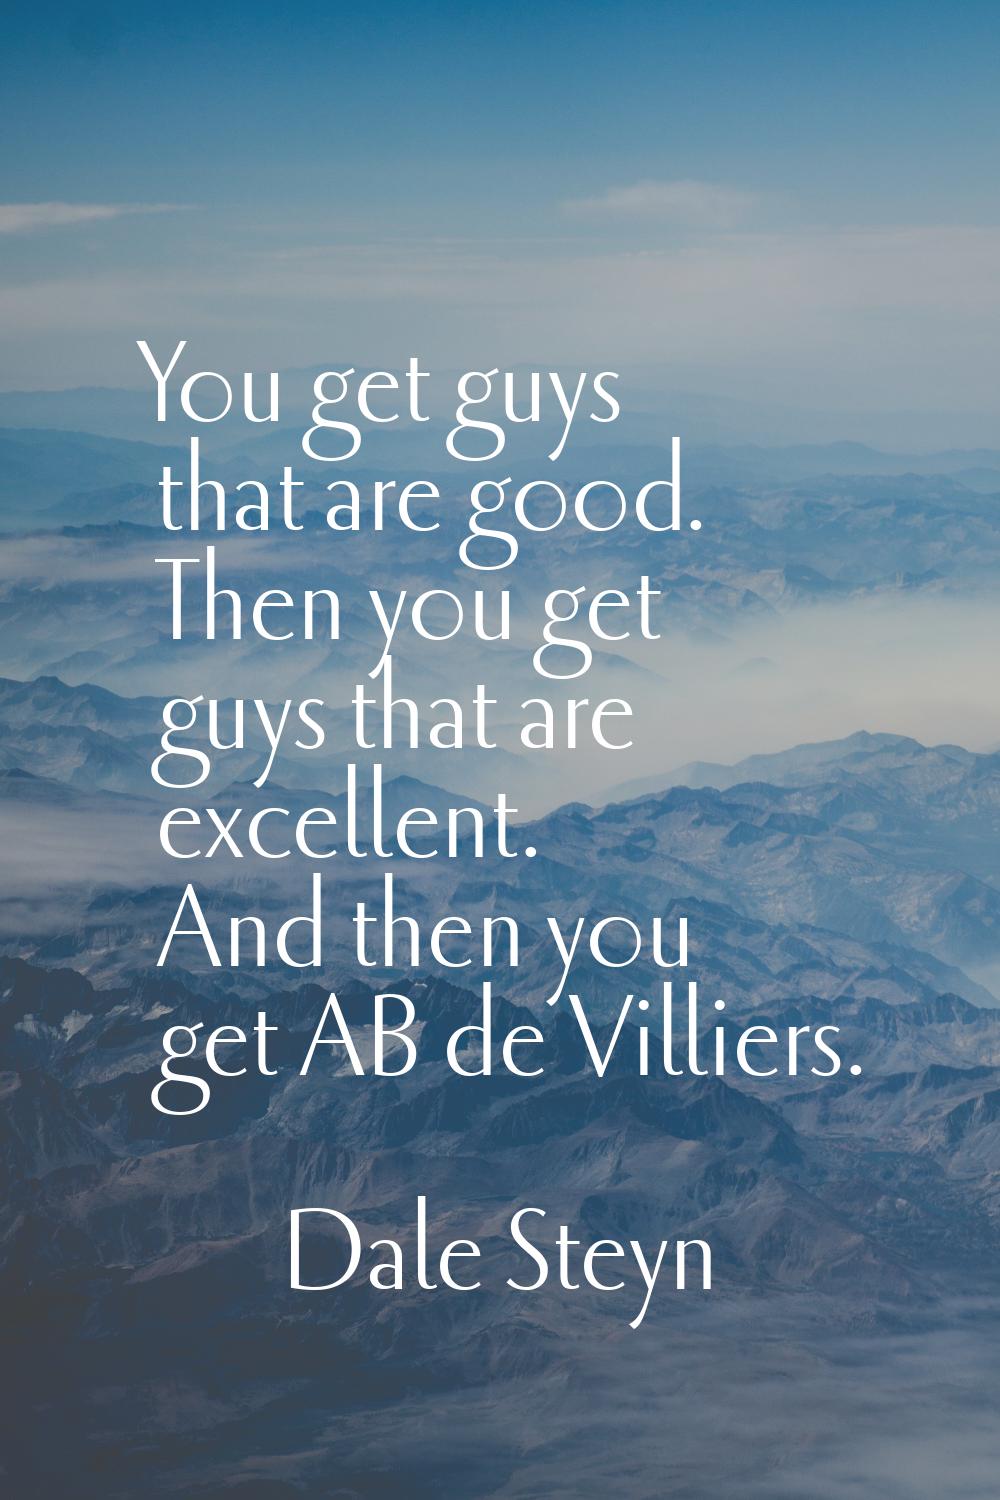 You get guys that are good. Then you get guys that are excellent. And then you get AB de Villiers.